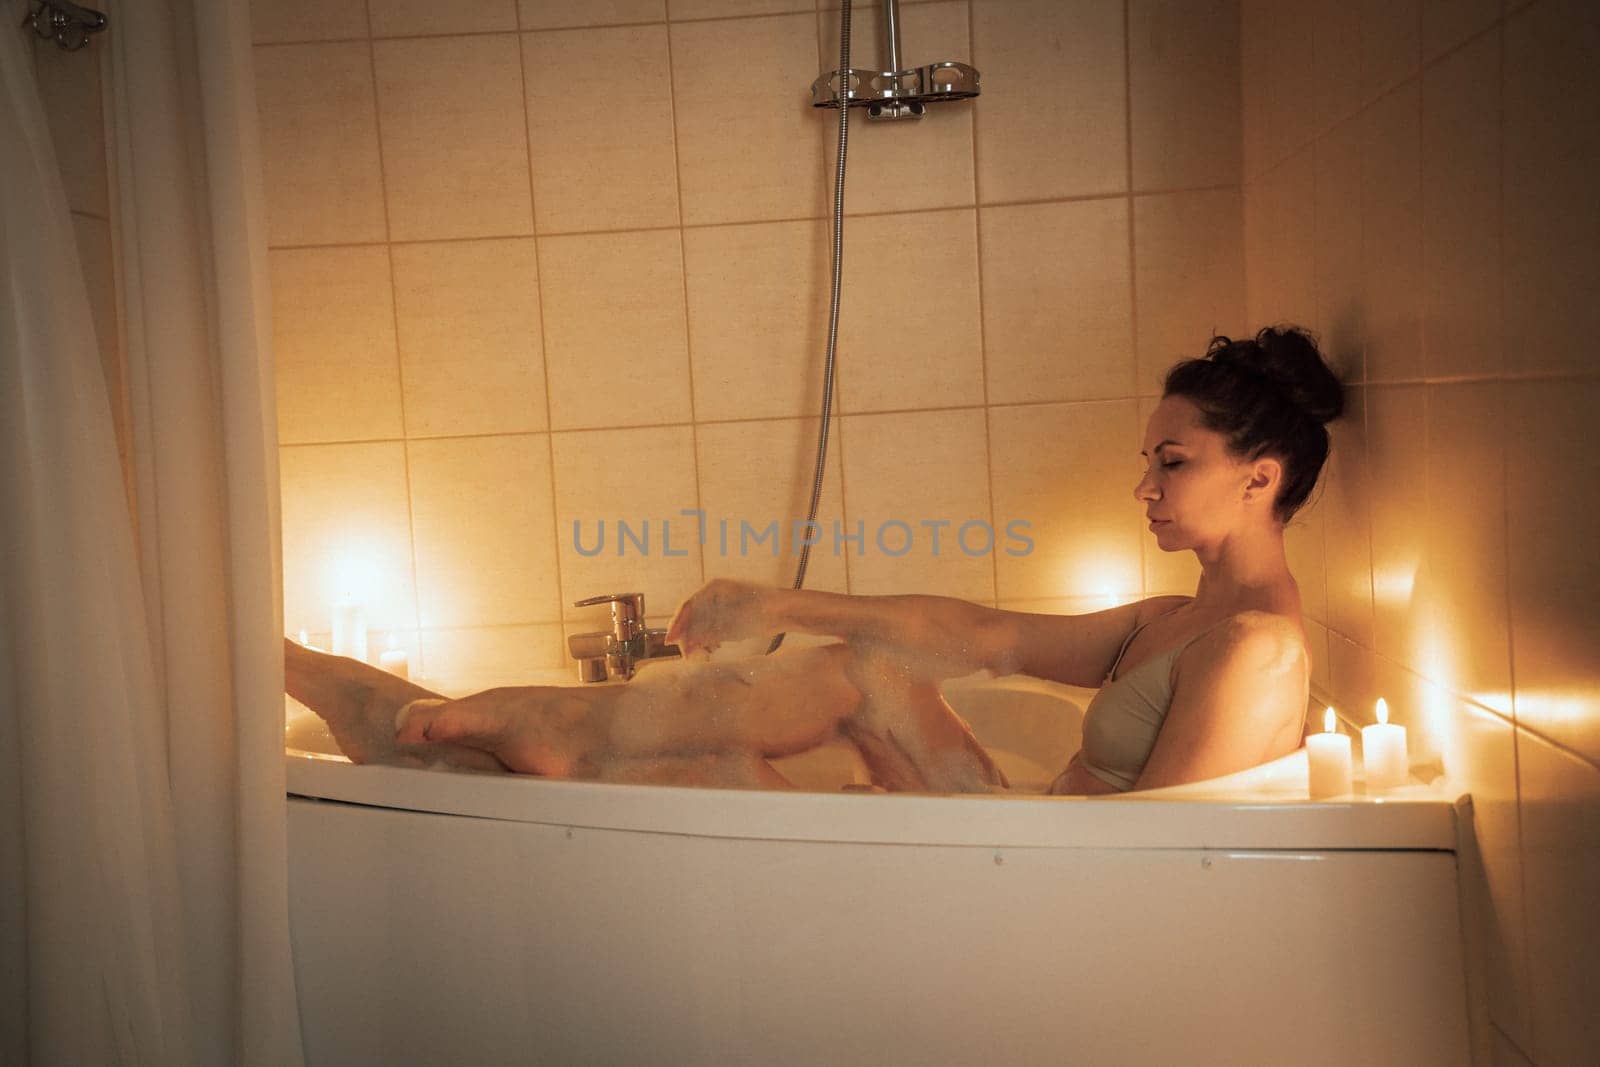 A woman is sitting in a bathtub with candles lit around her. Scene is relaxing and calming